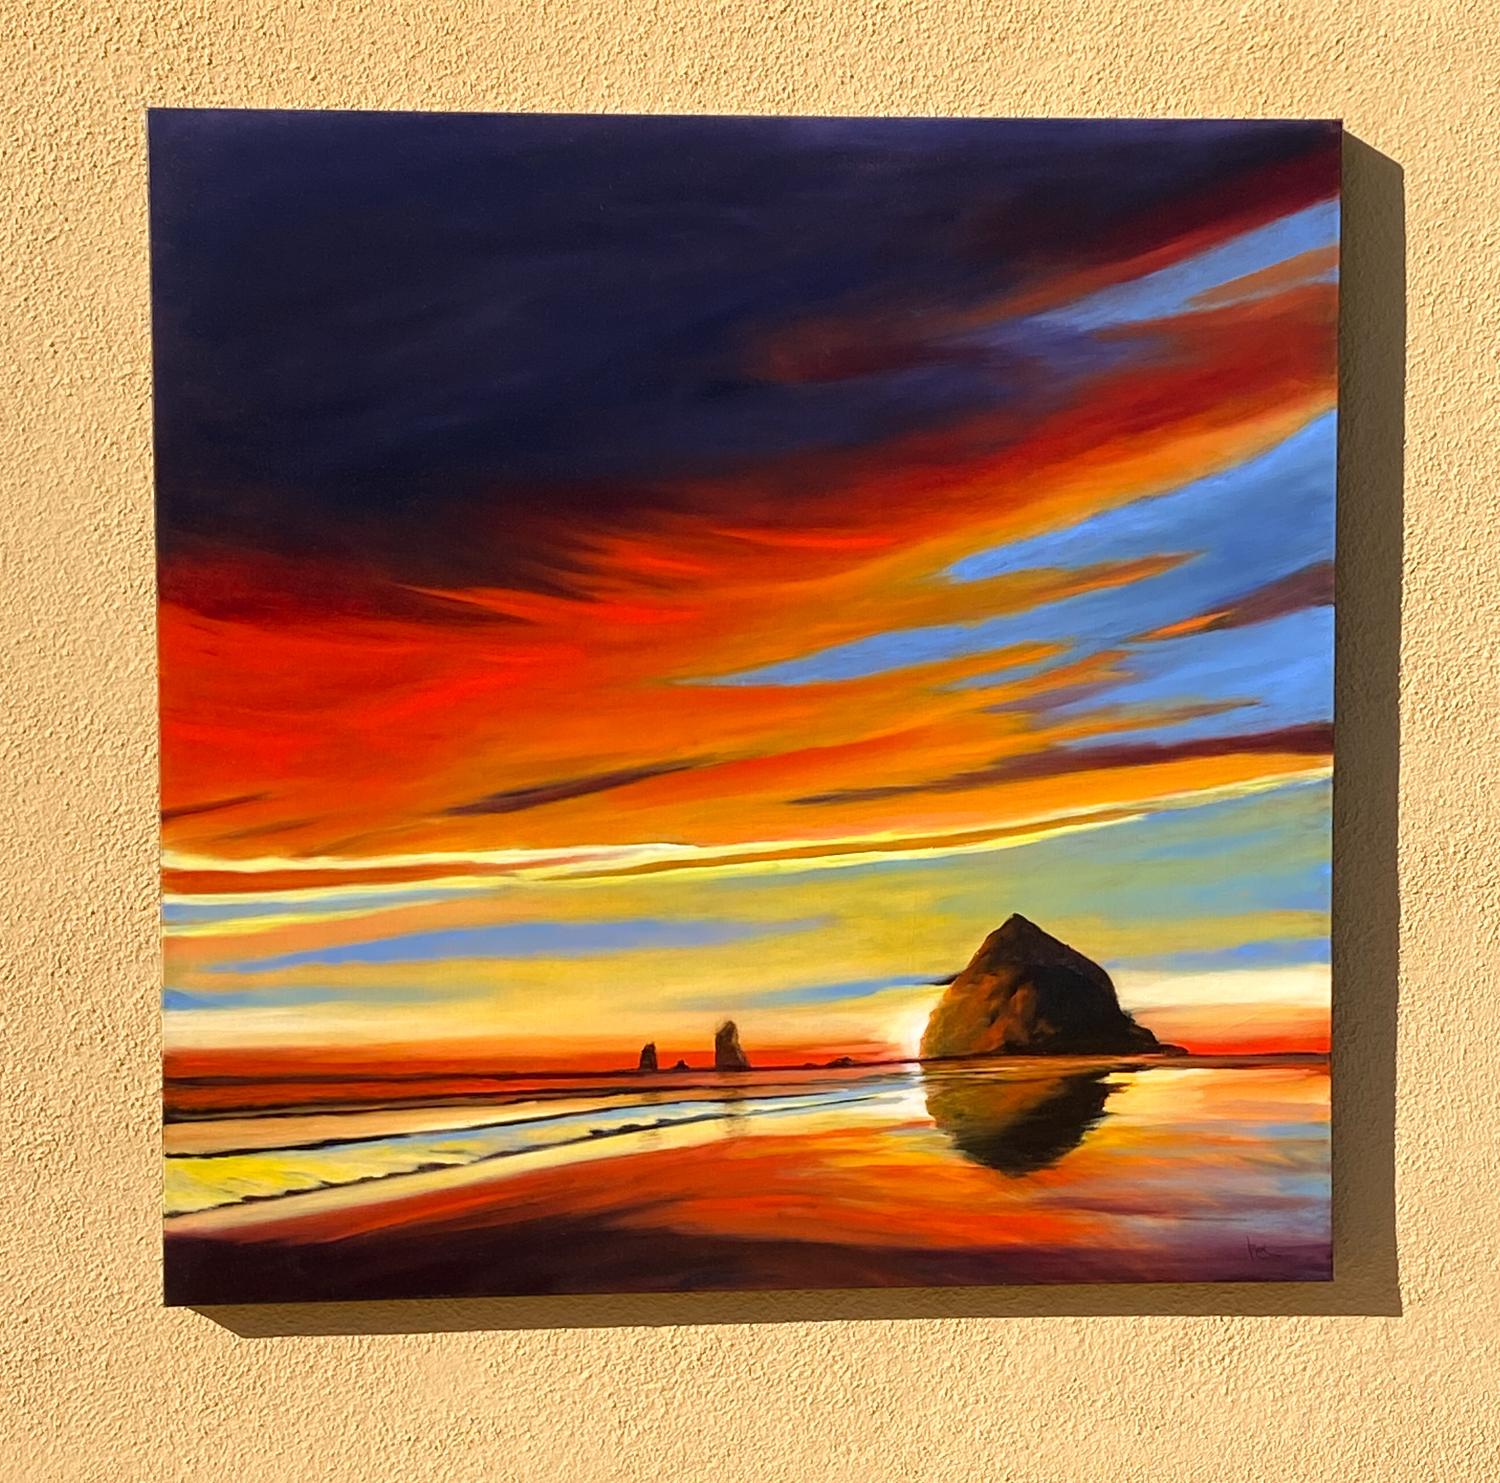 <p>Artist Comments<br>Dramatic technicolor clouds sweep across the sky, reflecting their vibrant hues on the water and sand below. The light from the nearly obscured sun peeks through the monolith, creating striking contrasts of light and shadow.